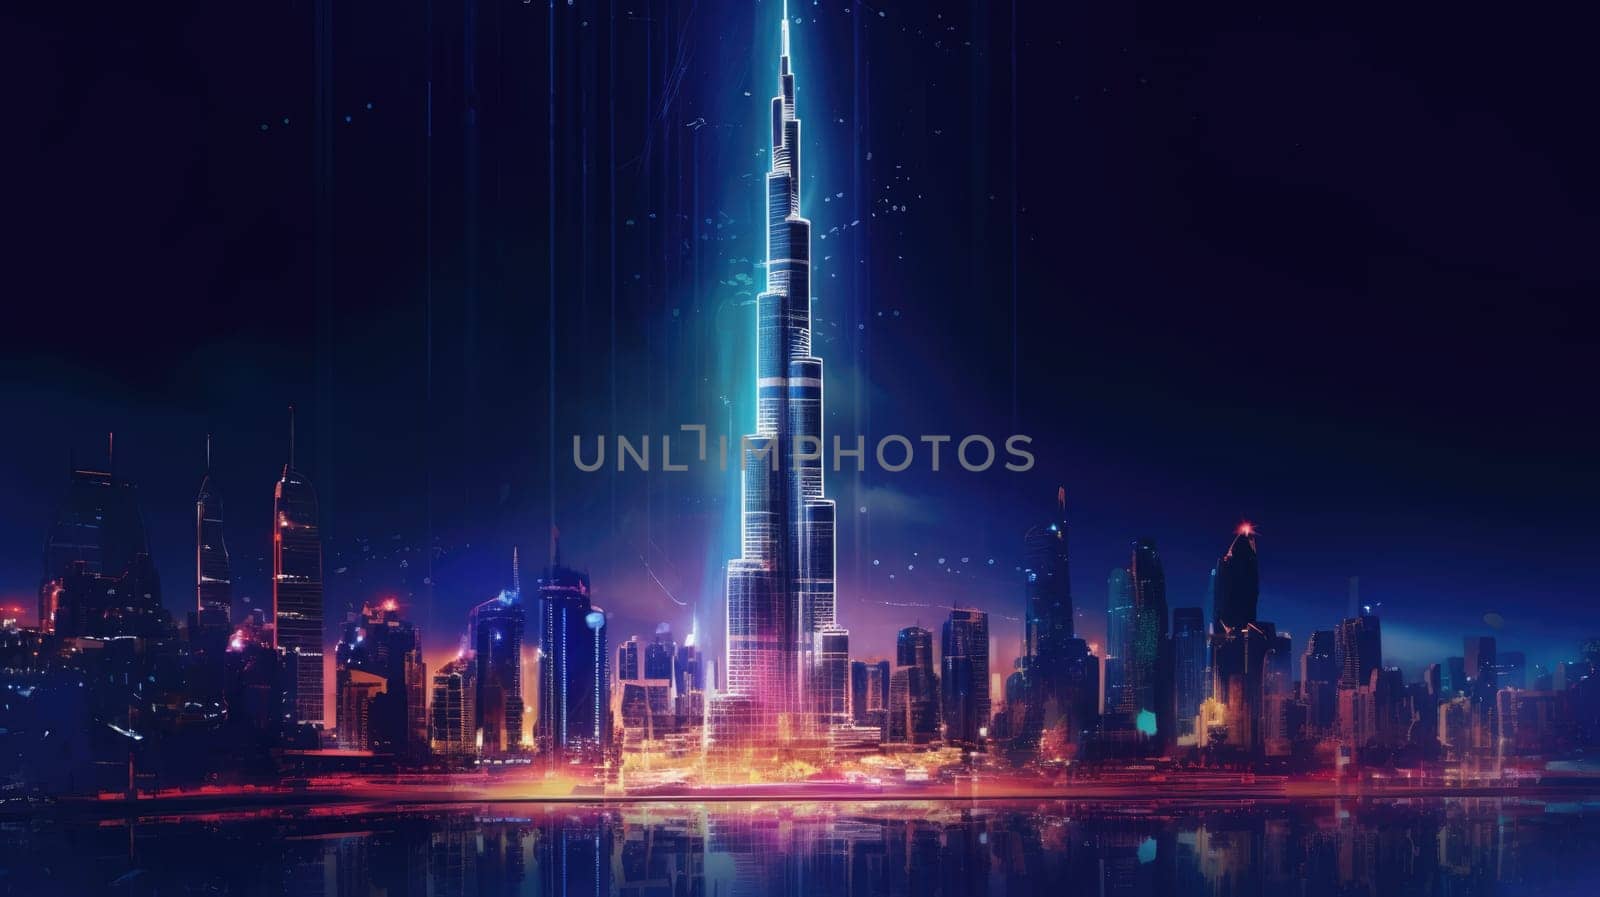 Stunning night view of Dubai downtown with Burj Khalifa, the worlds tallest building. Iconic UAE landmark for travel and tourism, showcasing the urban landscape on the shores of the Persian Gulf.